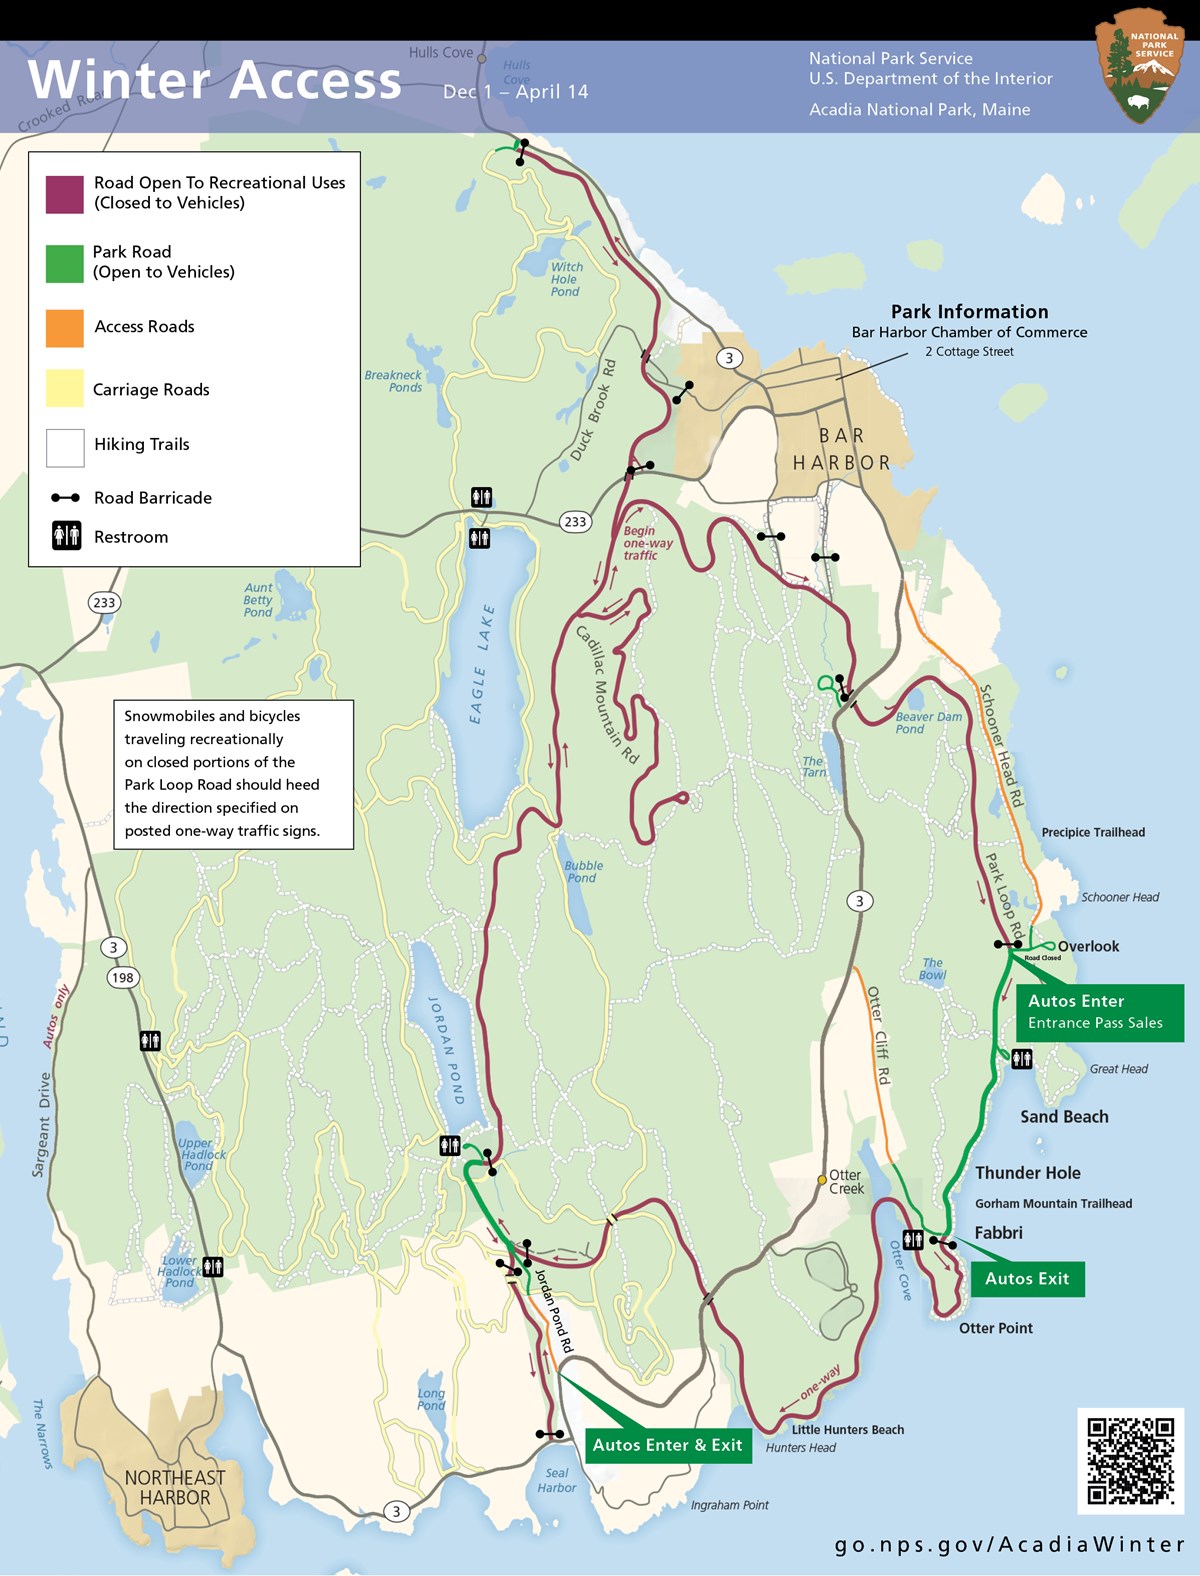 Map of roads to access portions of park open in winter